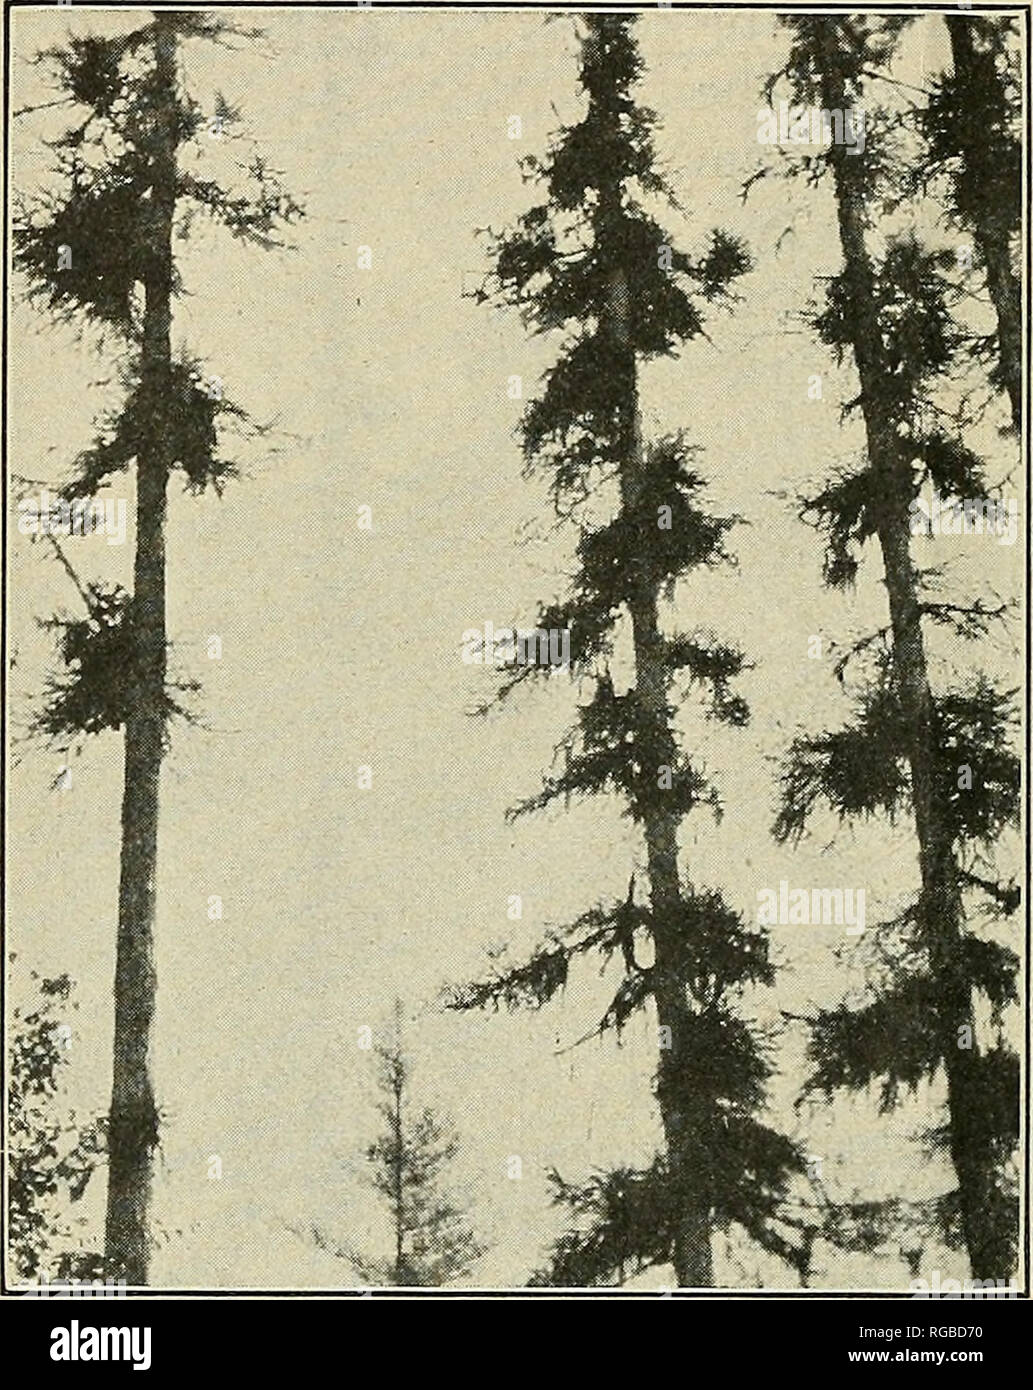 . Bulletin of the U.S. Department of Agriculture. Agriculture; Agriculture. BULLETIN&quot; 317, I*. S. DEPARTMENT OF AGRICULTURE. common to find them lopped off by the wind. This is especially true of tall stems that have come up in close canopy and afterwards become more or less isolated. In the case of the larch the ill effects of the wind are greatly augmented by the heavy loads of long, trail- ing lichens (Alectoria fremontii Tuck, and TJsnea longissima Ach.) supported by the branches (fig. 3). During rainy periods these lichens, through the absorption of large quantities of water, increas Stock Photo